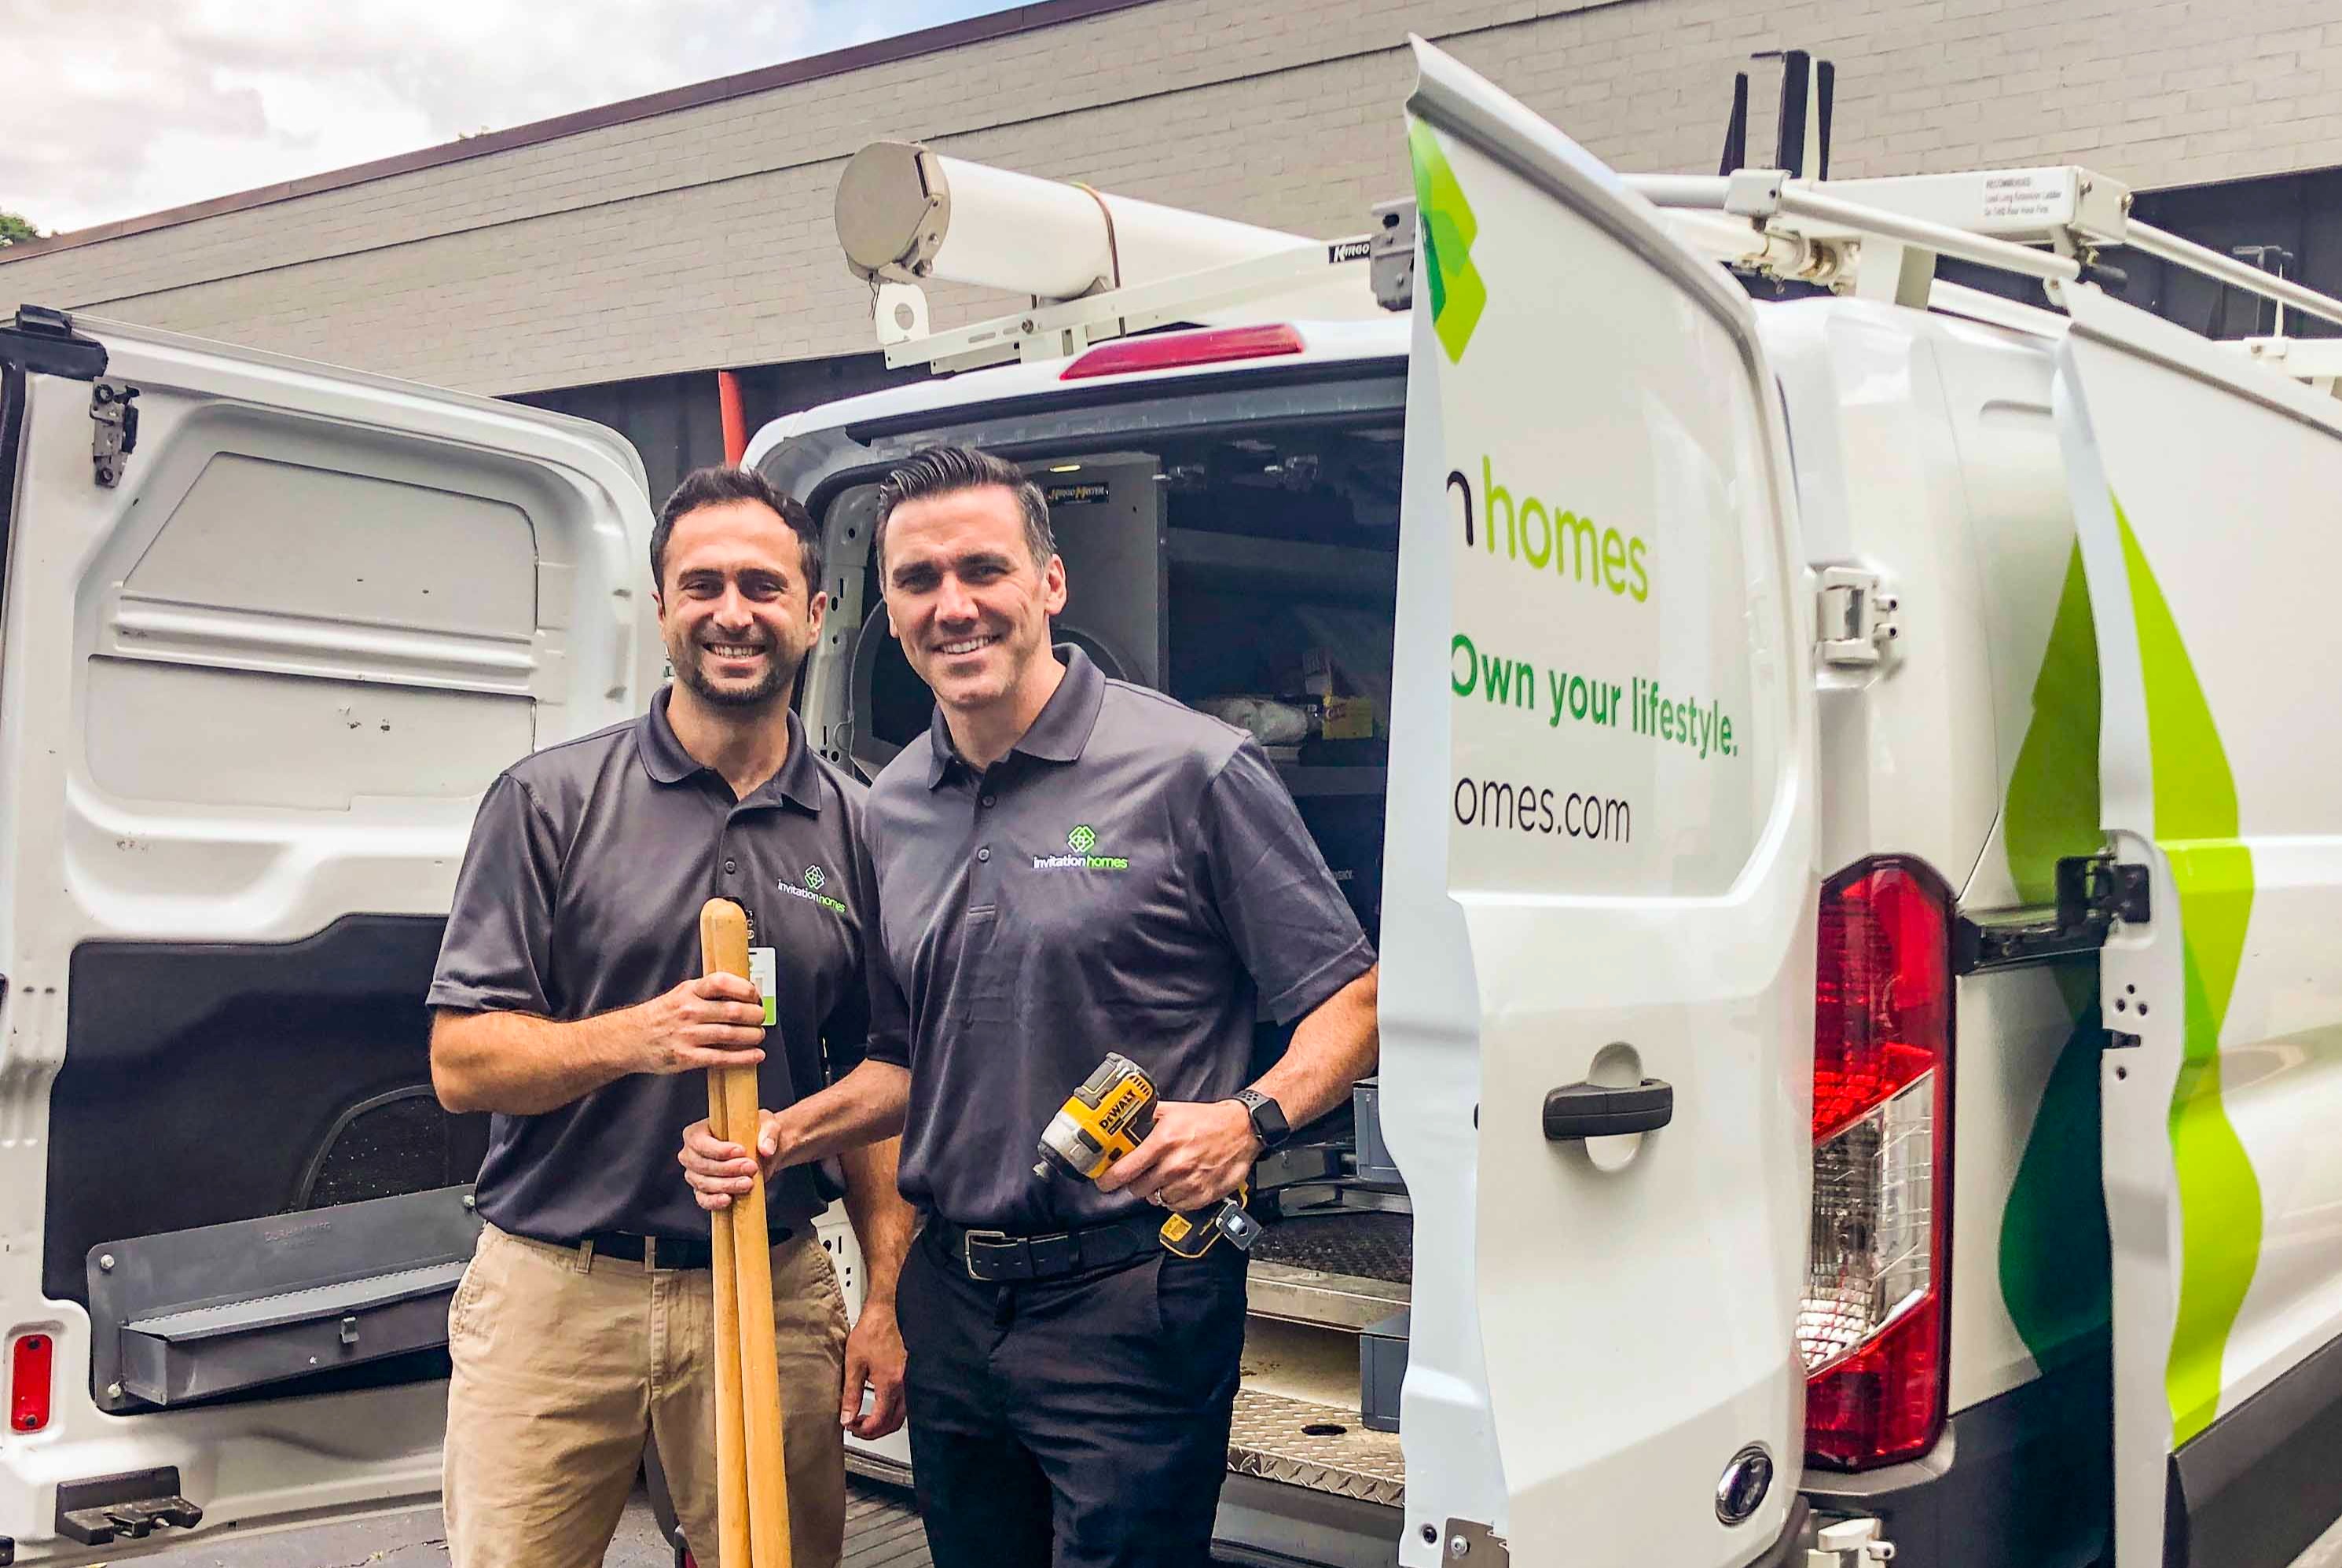 Invitation Homes CEO working together with maintenance tech.